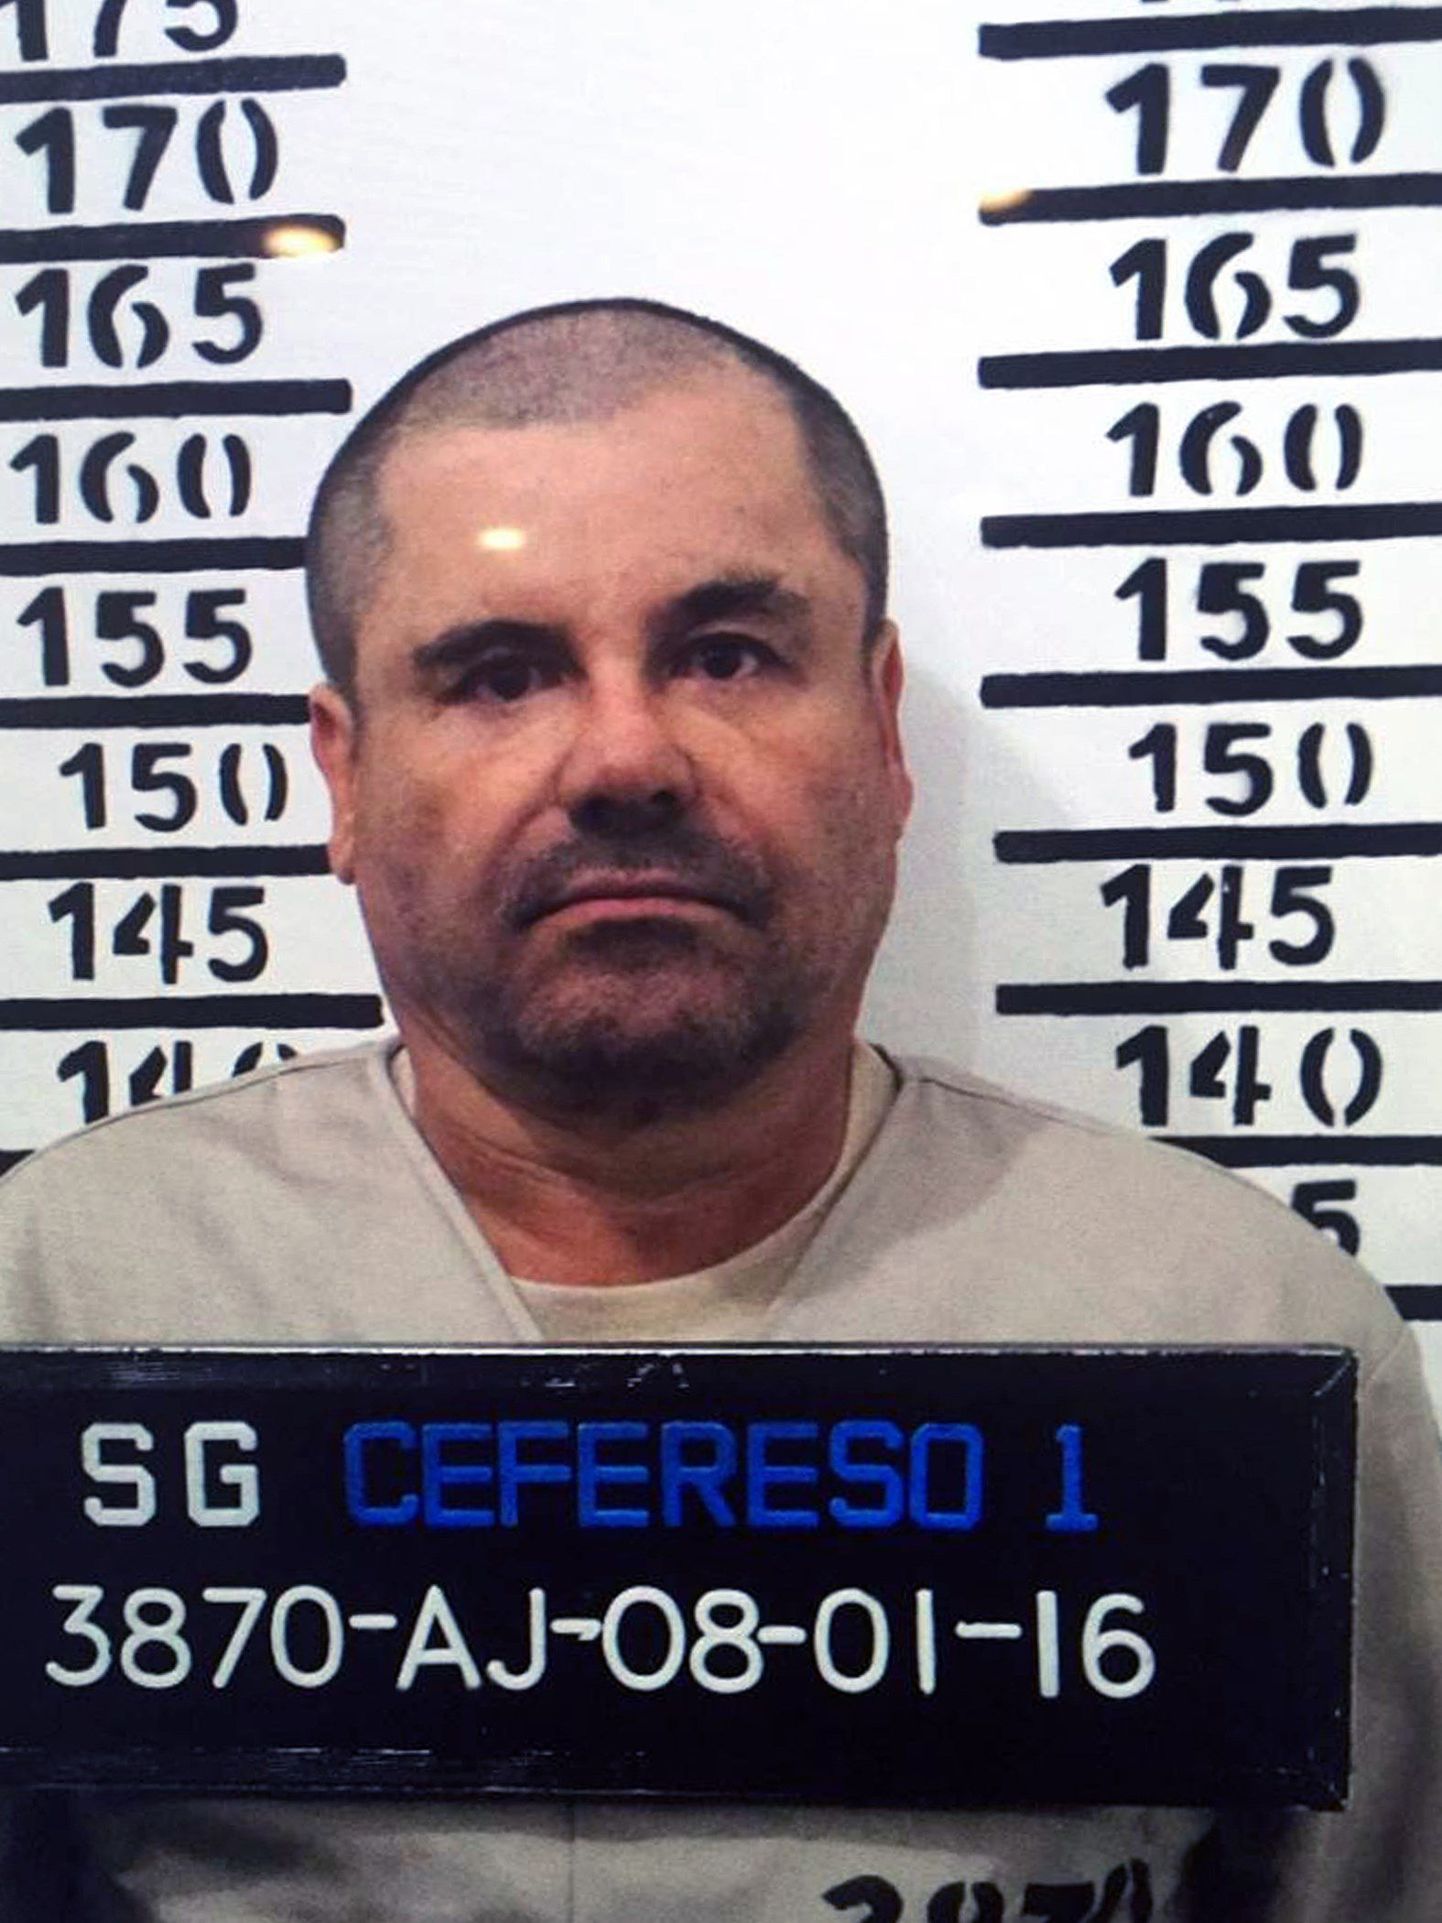 Handout police photograph of Joaquin Guzman Loera aka "El Chapo" taken on January 8, 2016, as he was imprisoned in Almoloya de Juarez, Mexico State. Mexican marines recaptured fugitive drug kingpin Joaquin "El Chapo" Guzman on Friday in the northwest of the country, six months after his spectacular prison break embarrassed authorities. AFP PHOTO/OFFICIAL SOURCES